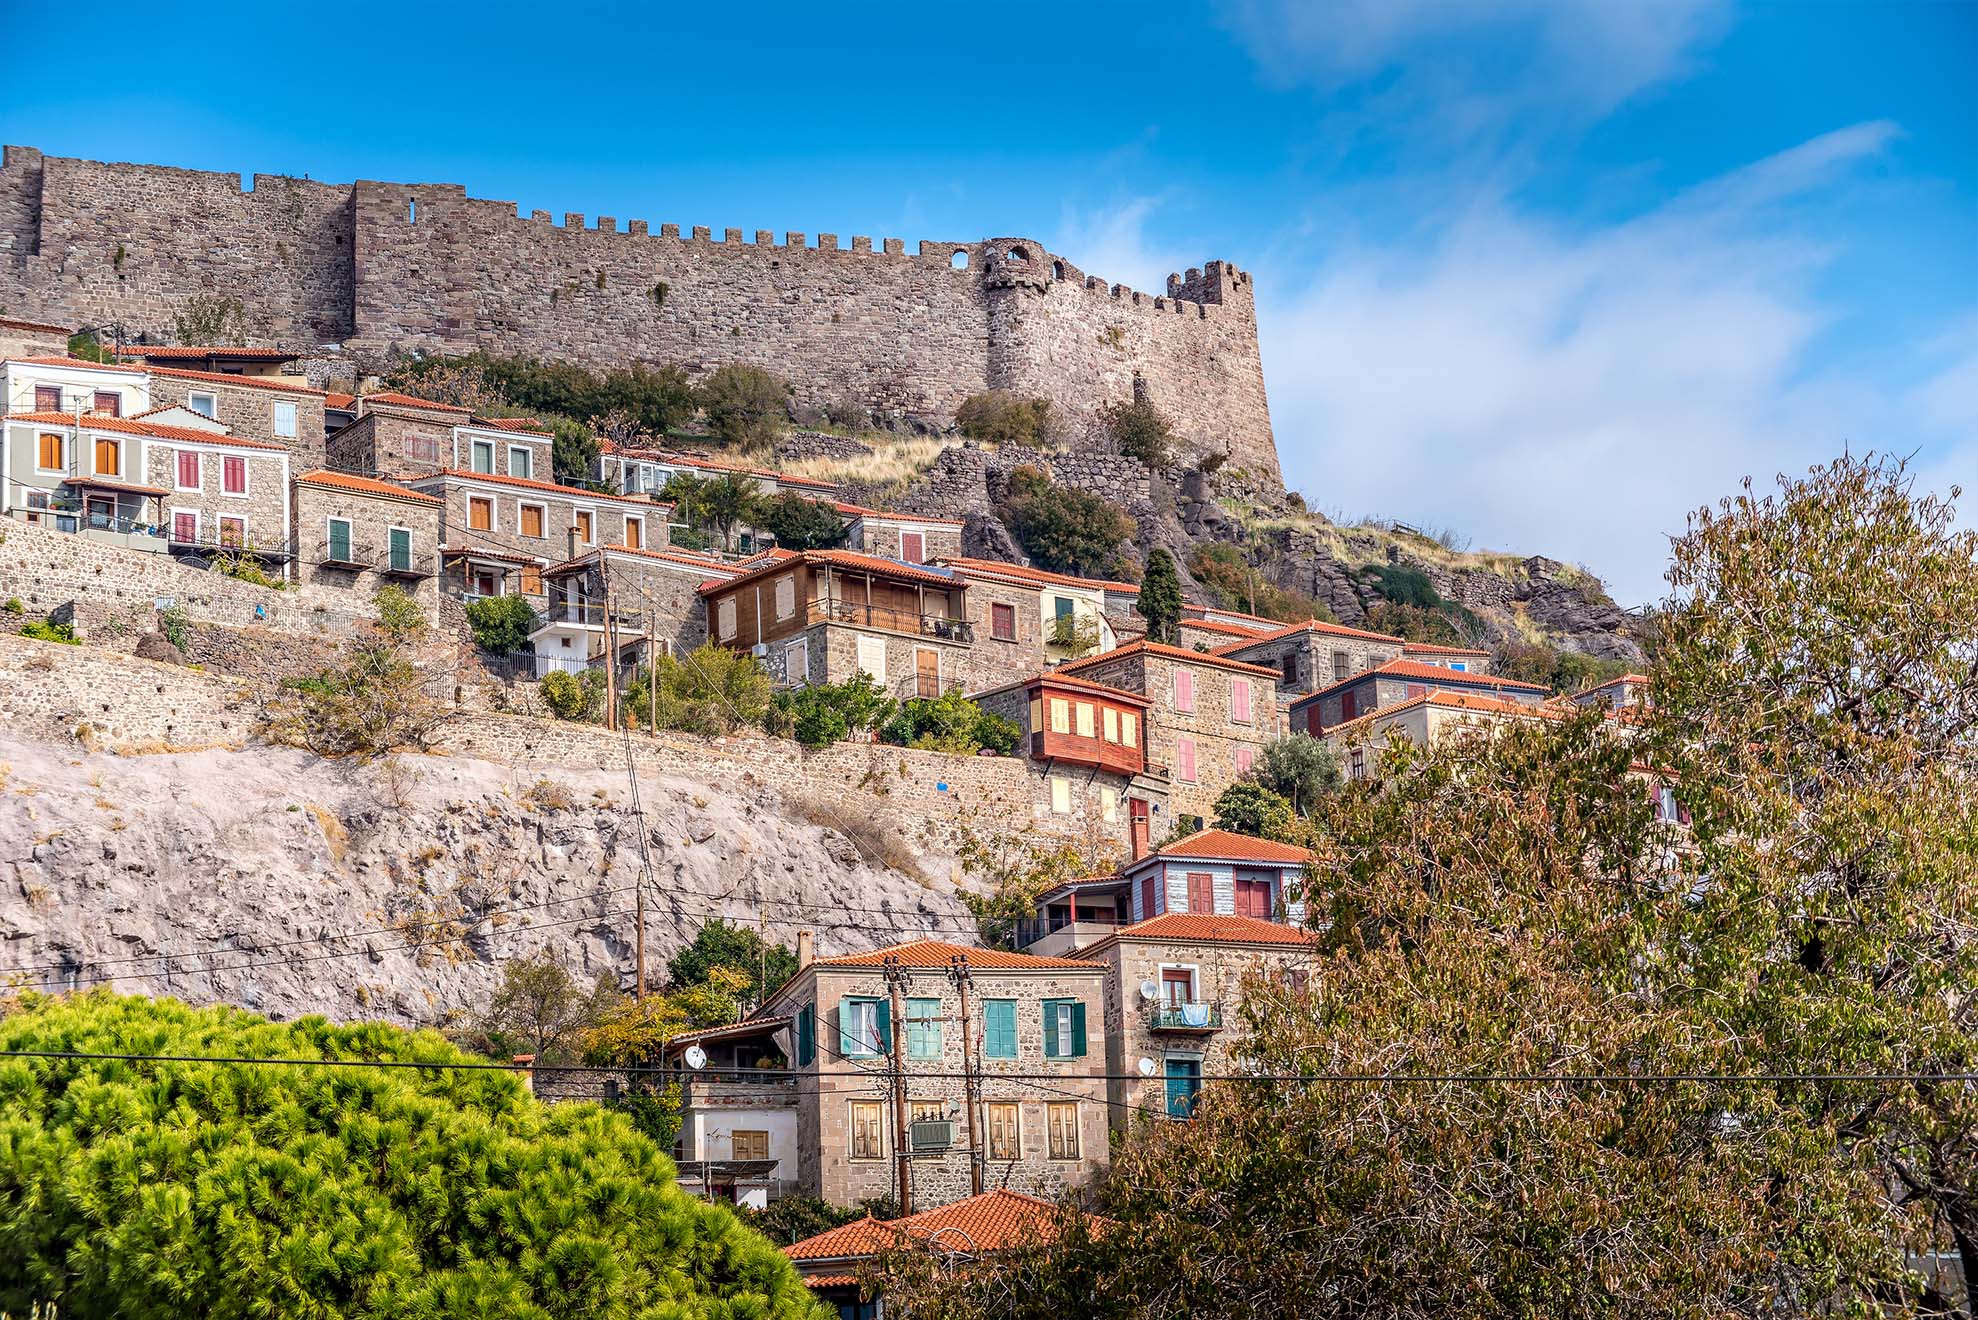 Top Five Things to See and Do in Lesvos